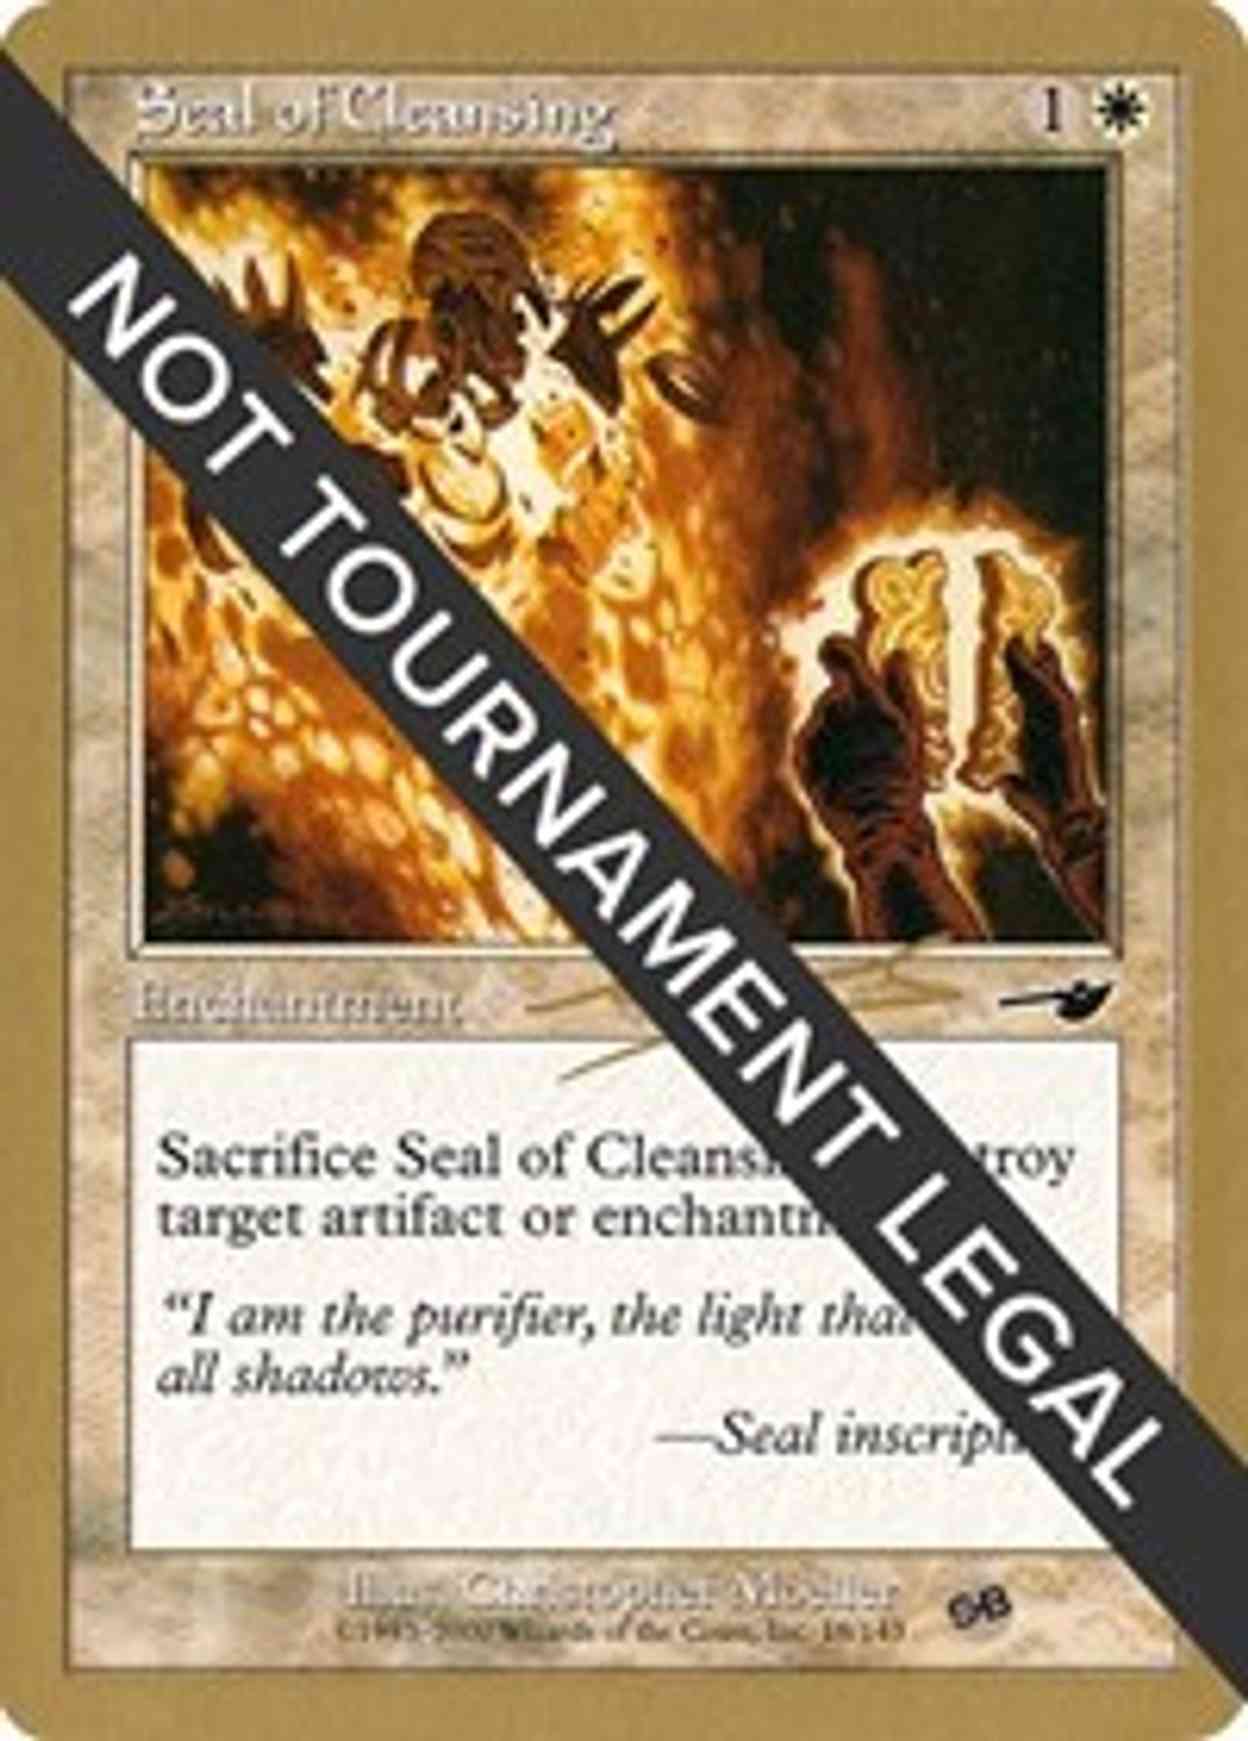 Seal of Cleansing - 2000 Nicolas Labarre (NMS) (SB) magic card front